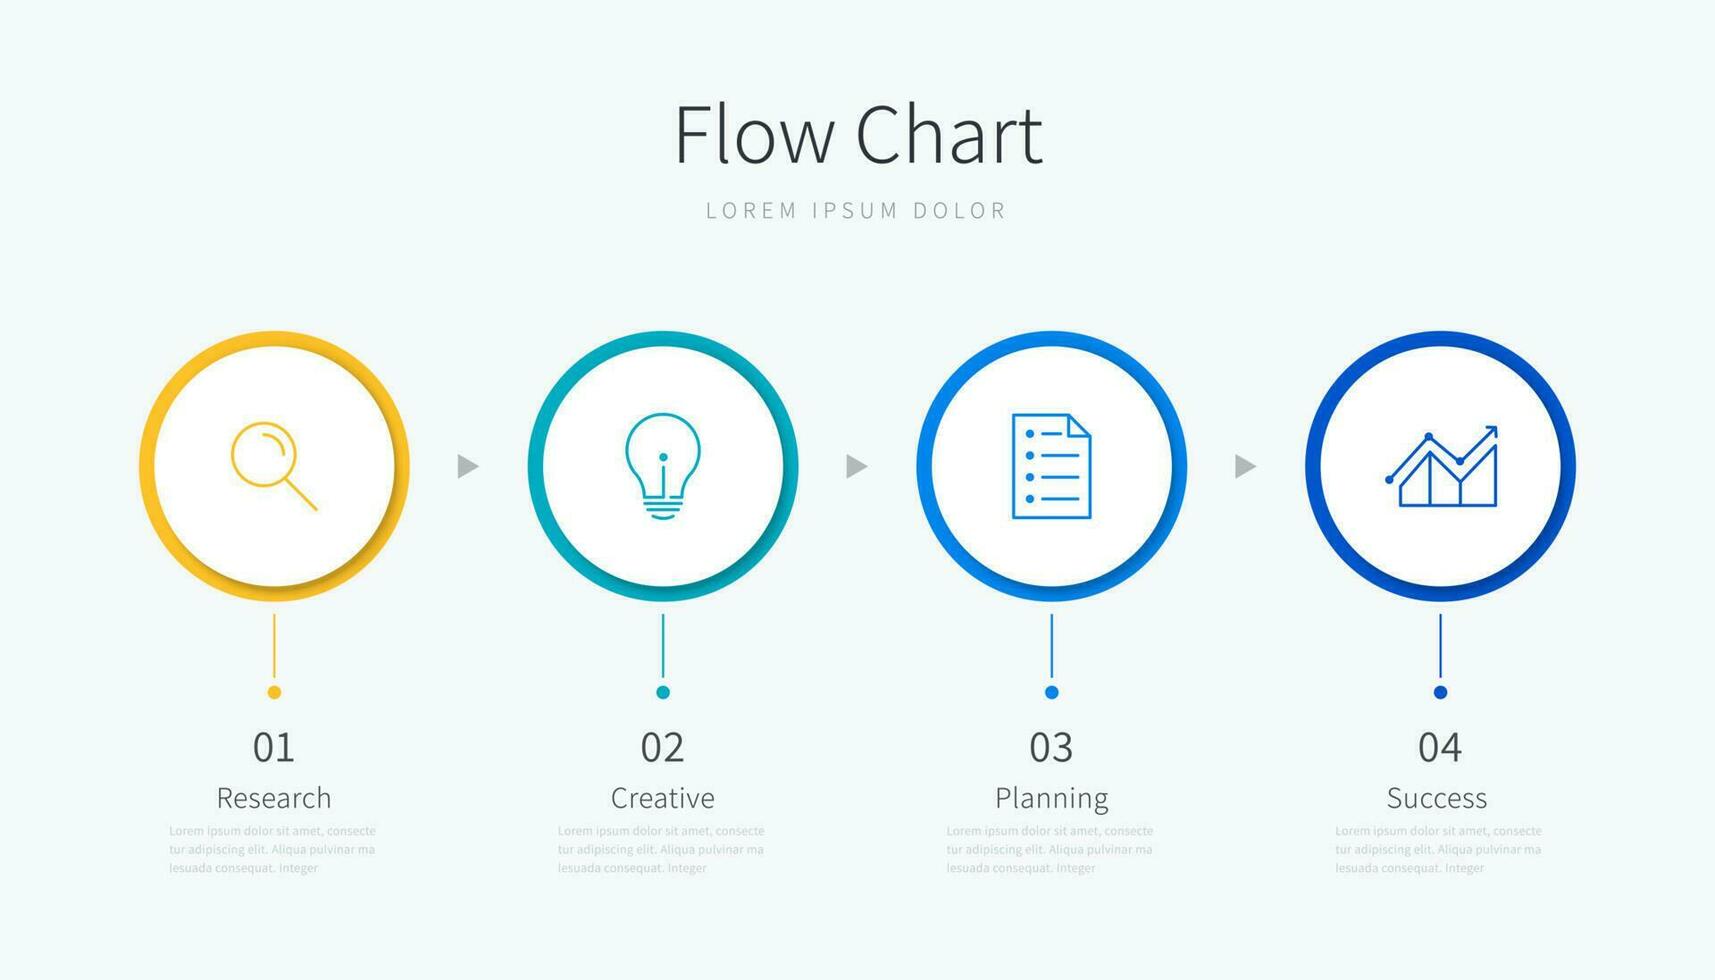 Flow chart infographic template with design elements and icons vector